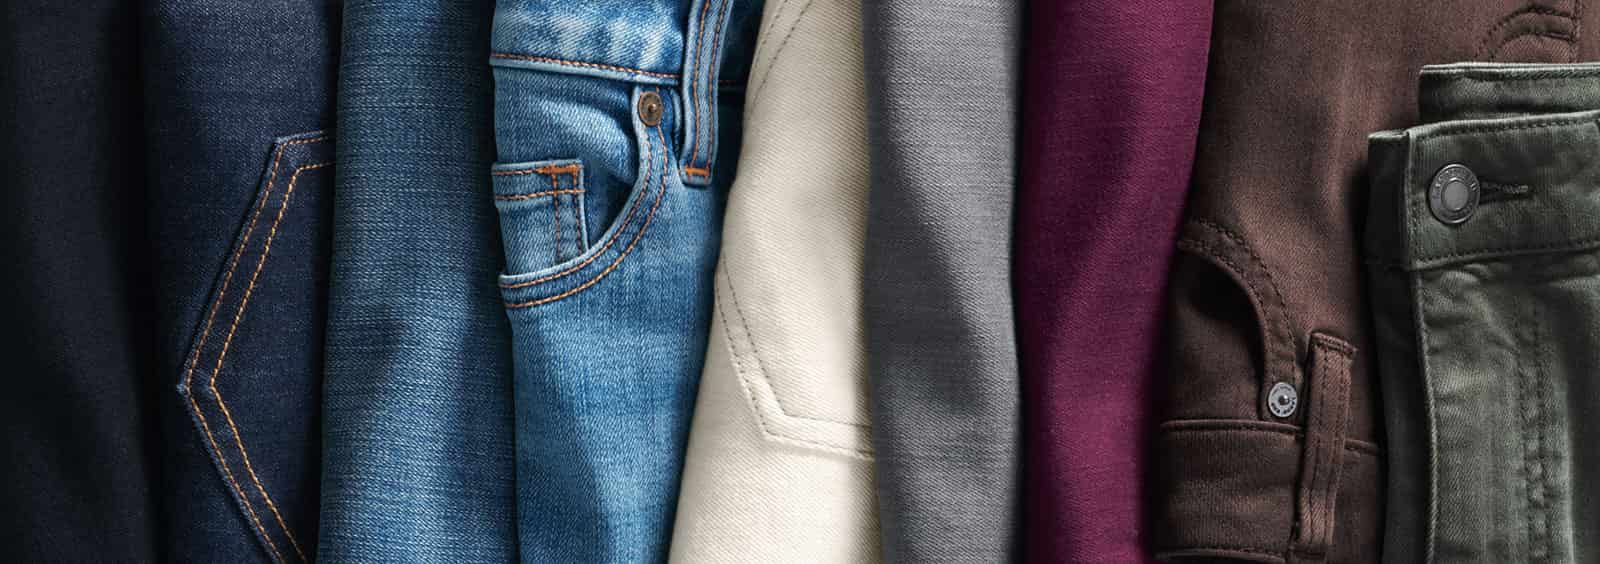 Straight-Leg Jeans That Are Perfect for the Workplace